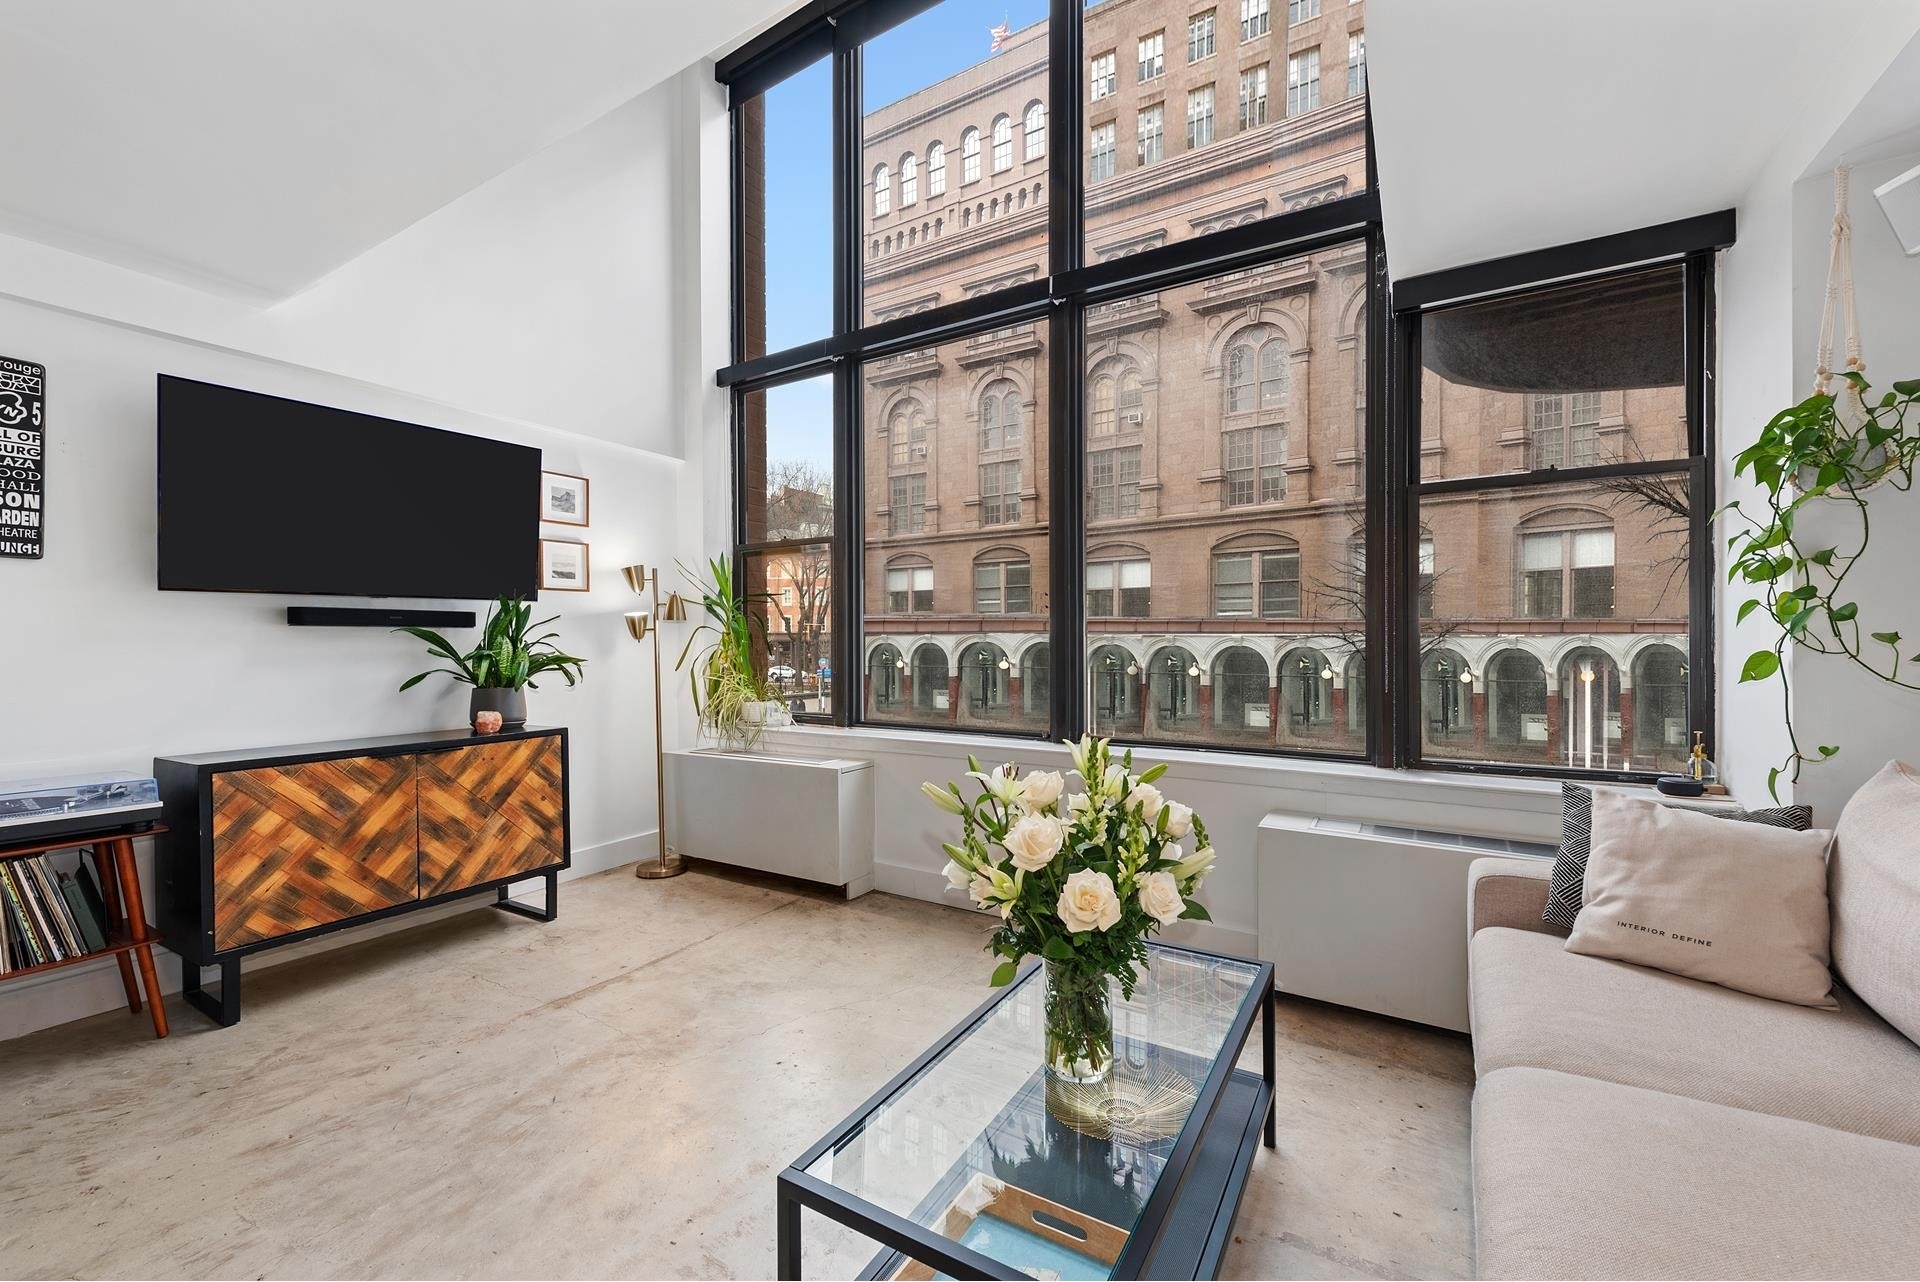 Property at COOPER SQUARE, 65 COOPER SQ, 2B East Village, New York, New York 10003